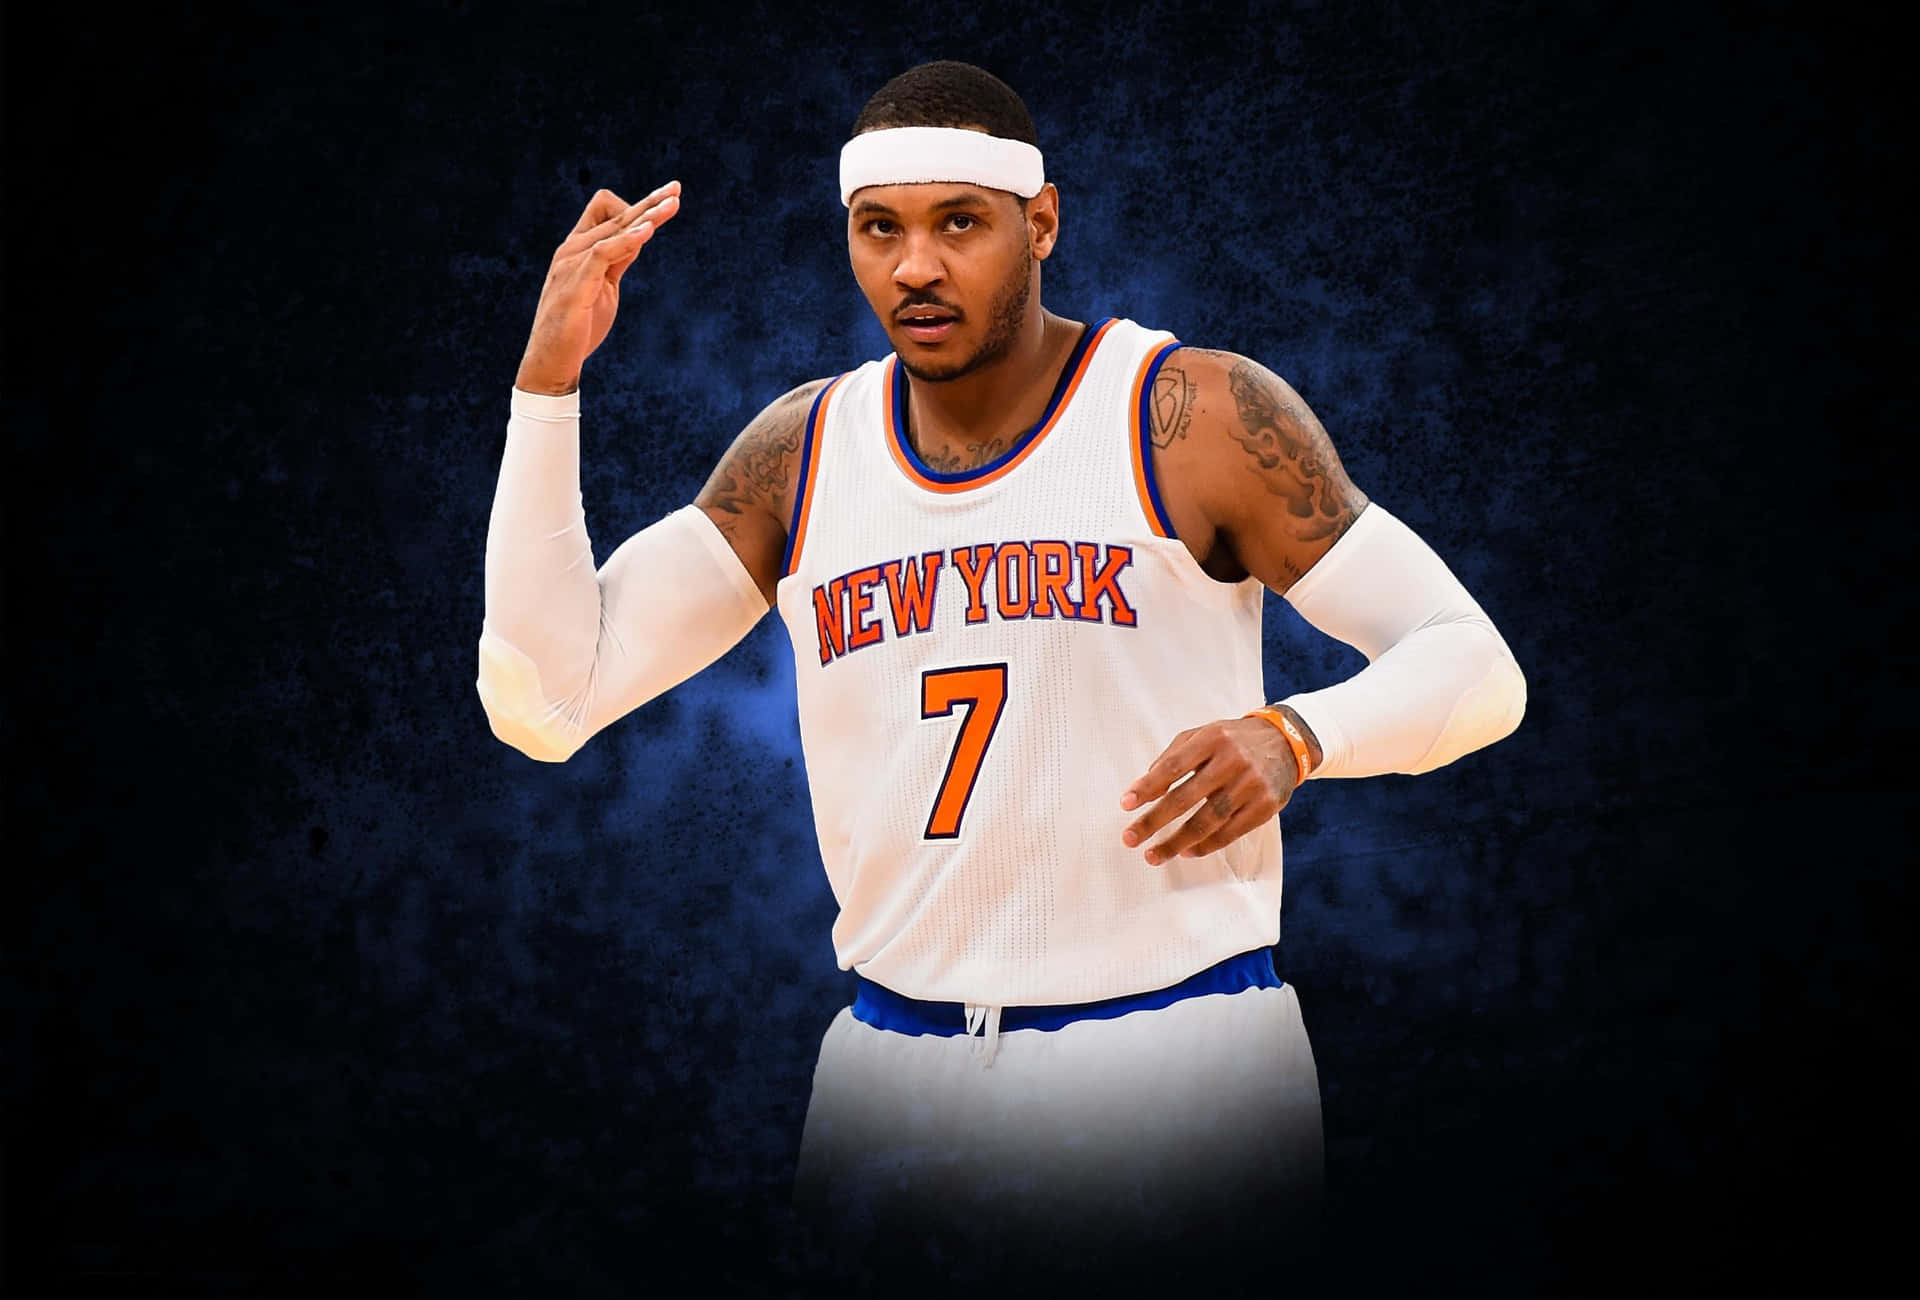 Nba2k Carmelo Anthony In Italian Would Be 